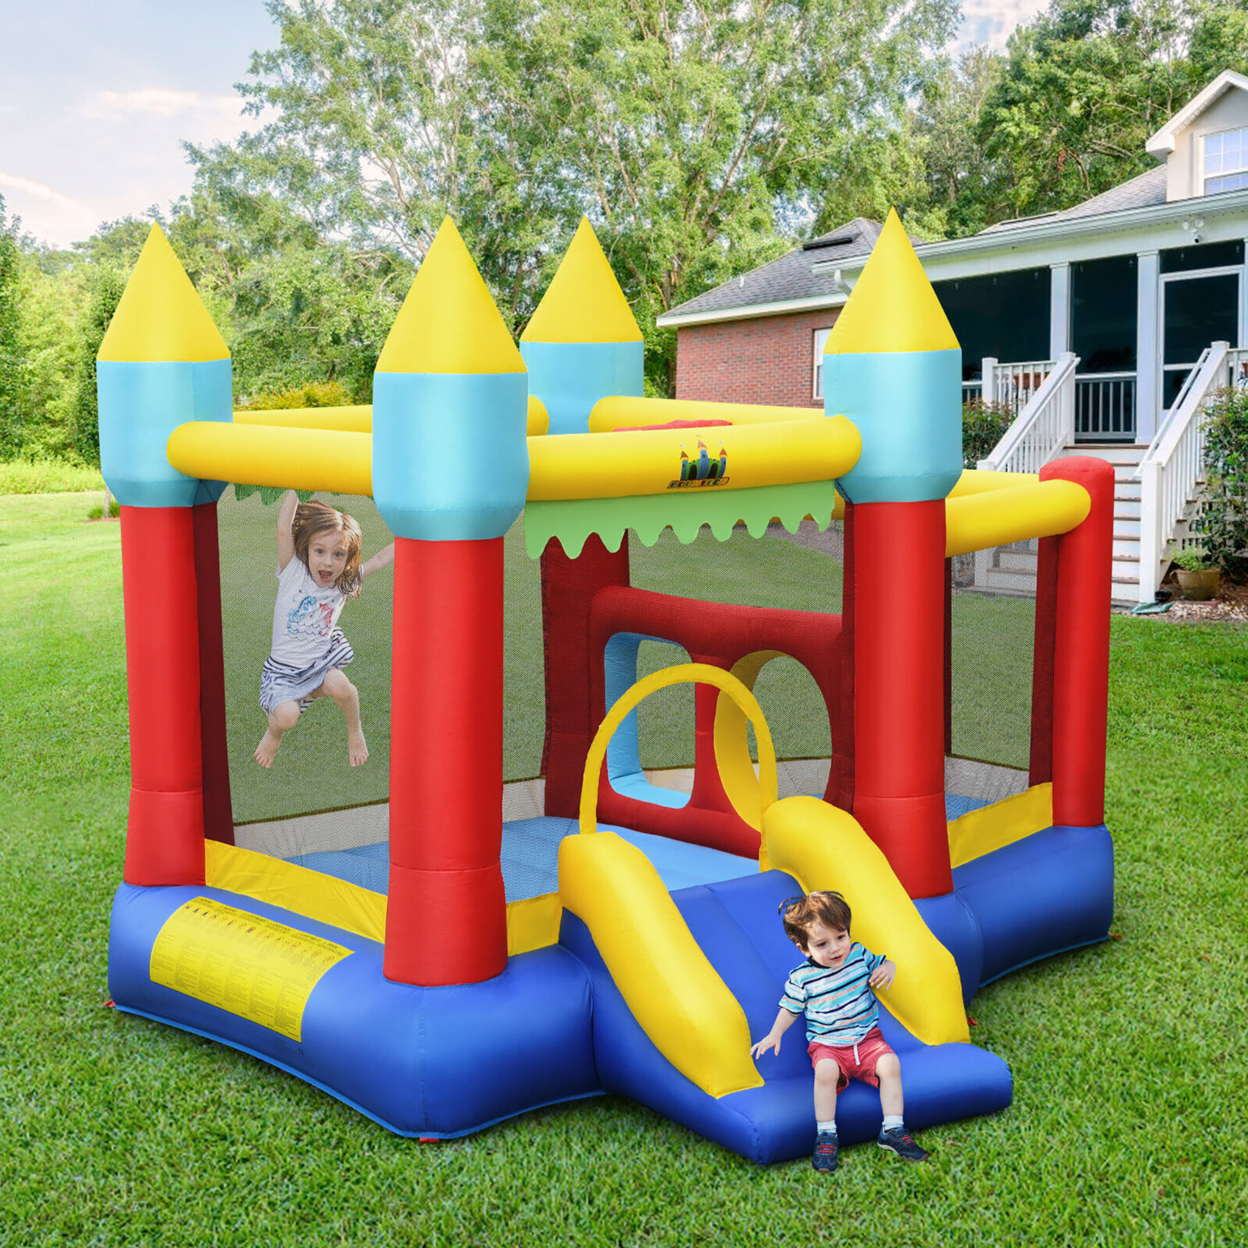 Inflatable Bounce House Slide Jumping Castle W/ Tunnels Ball Pit & 550W Blower